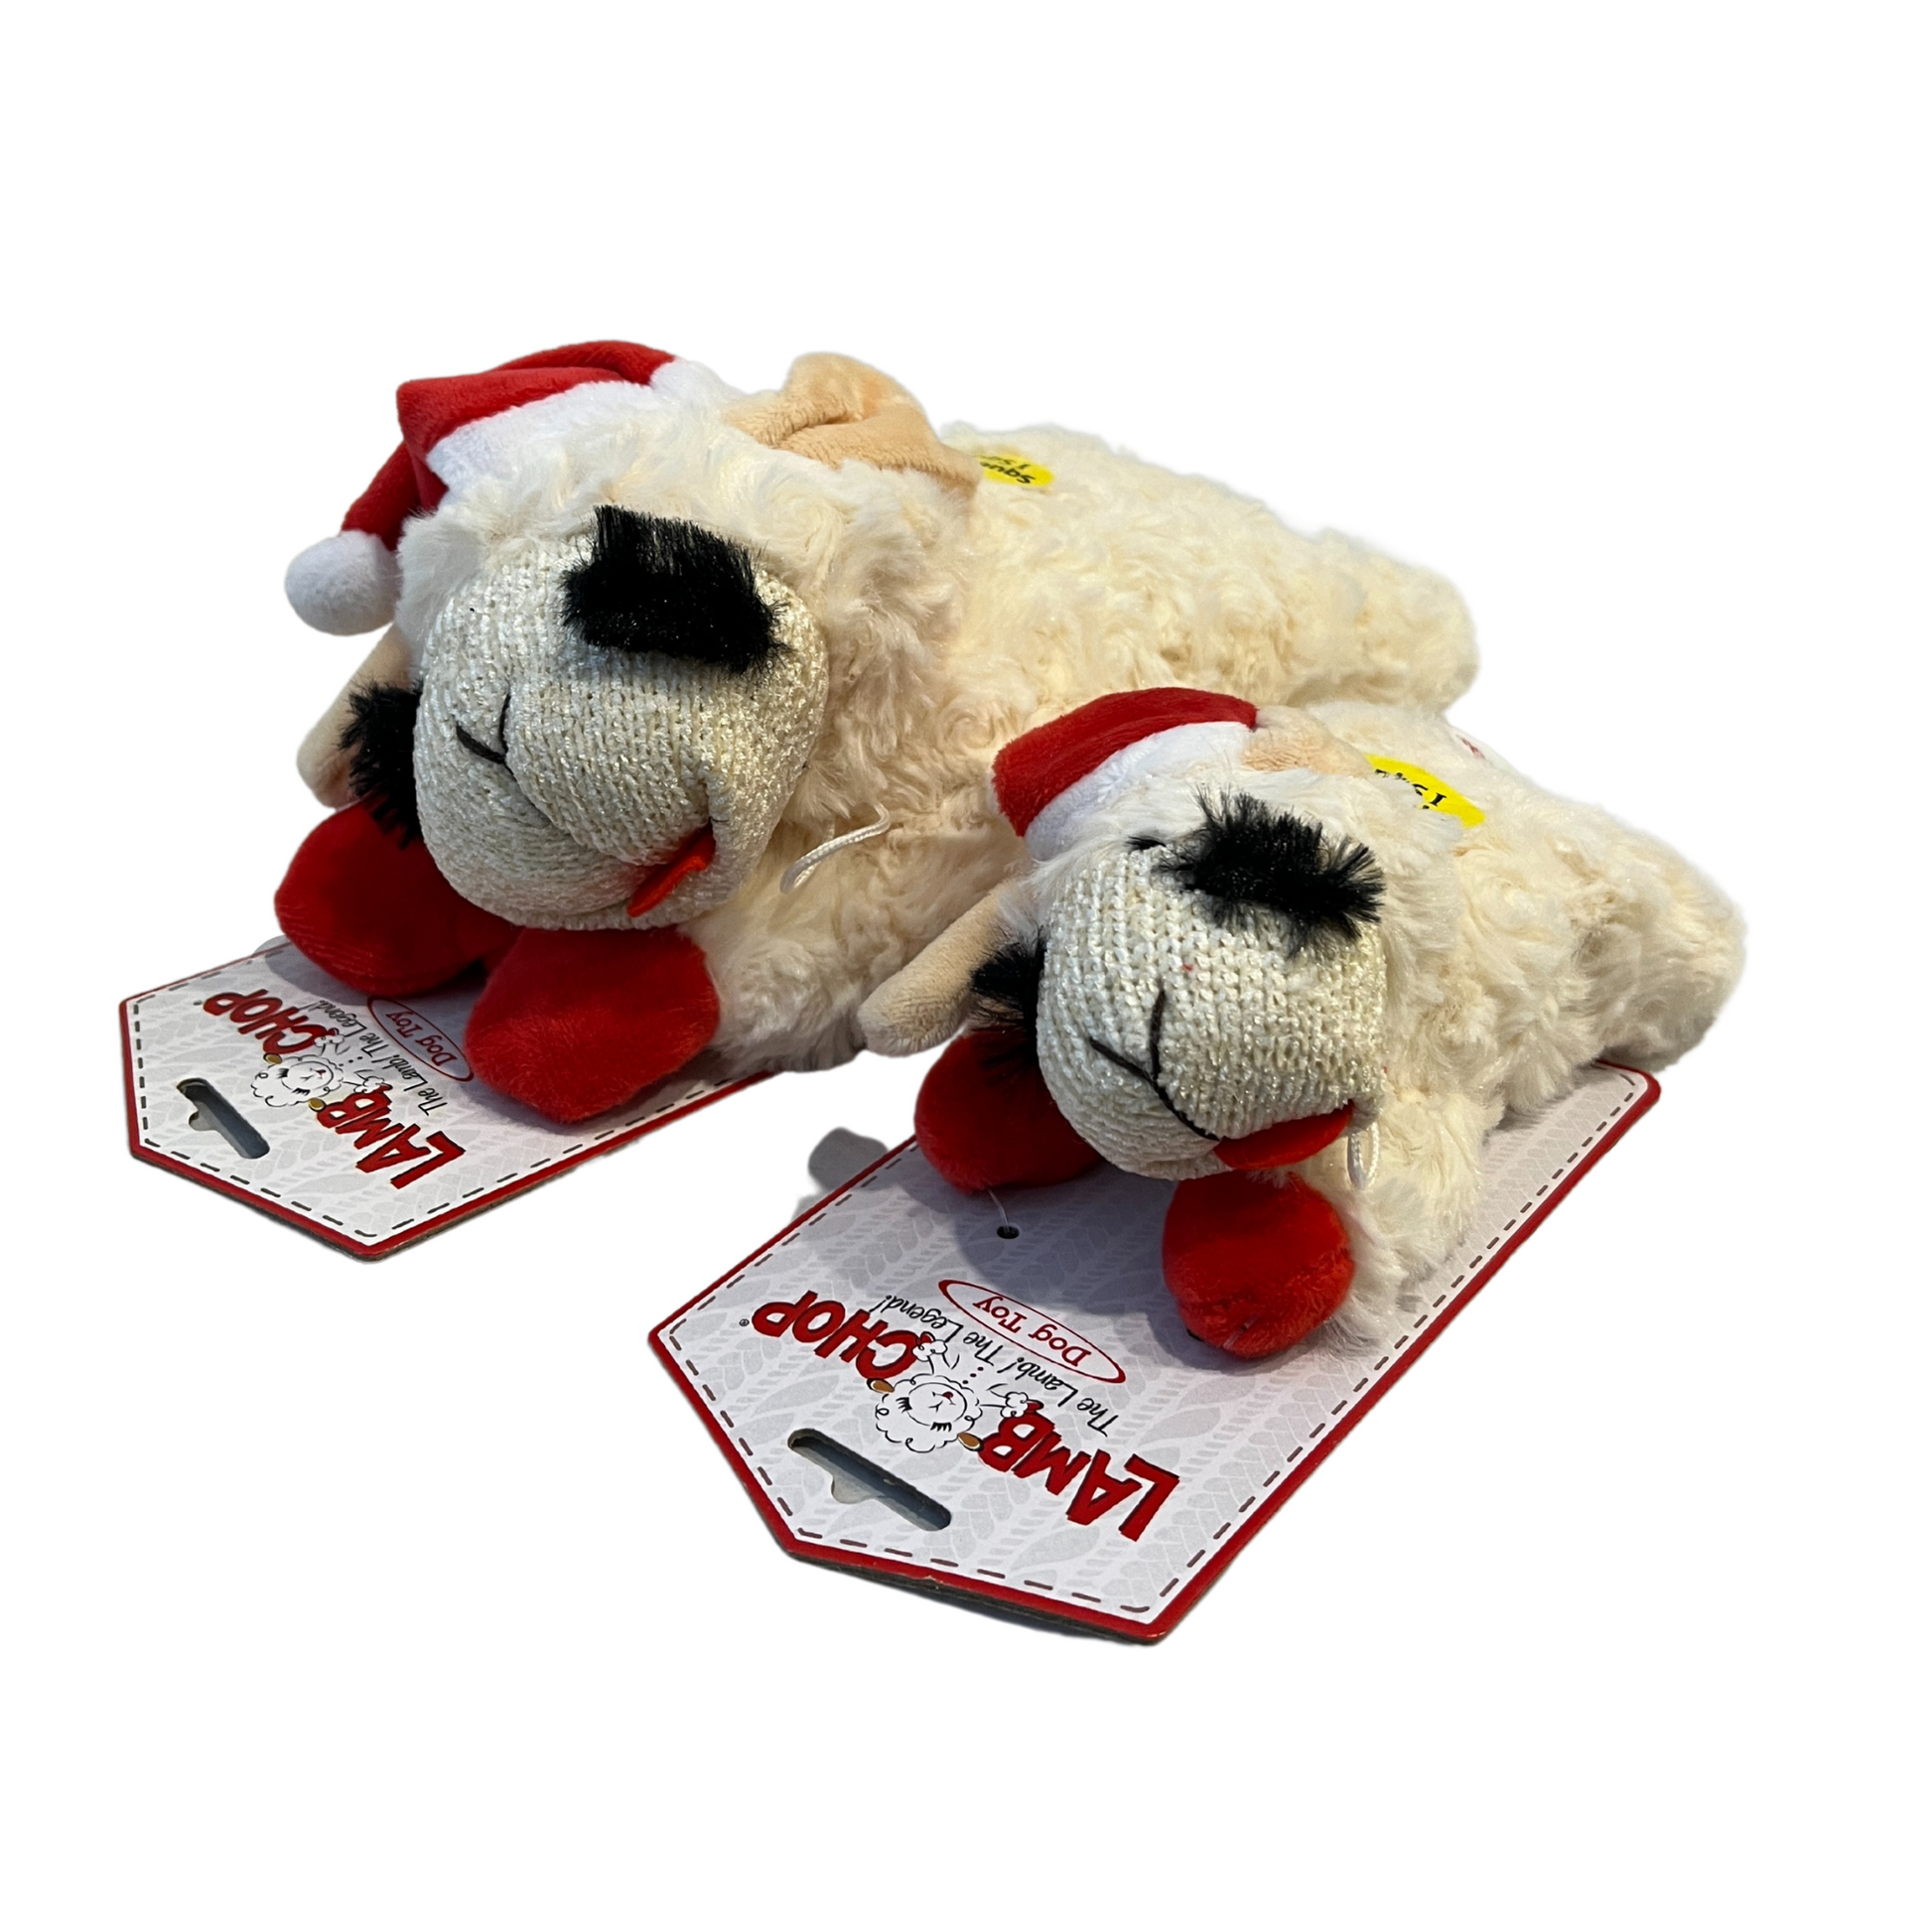 Multipet Holiday Lamb Chop Dog Toy with Santa Hat- 10.5" and 6" version next to one another.